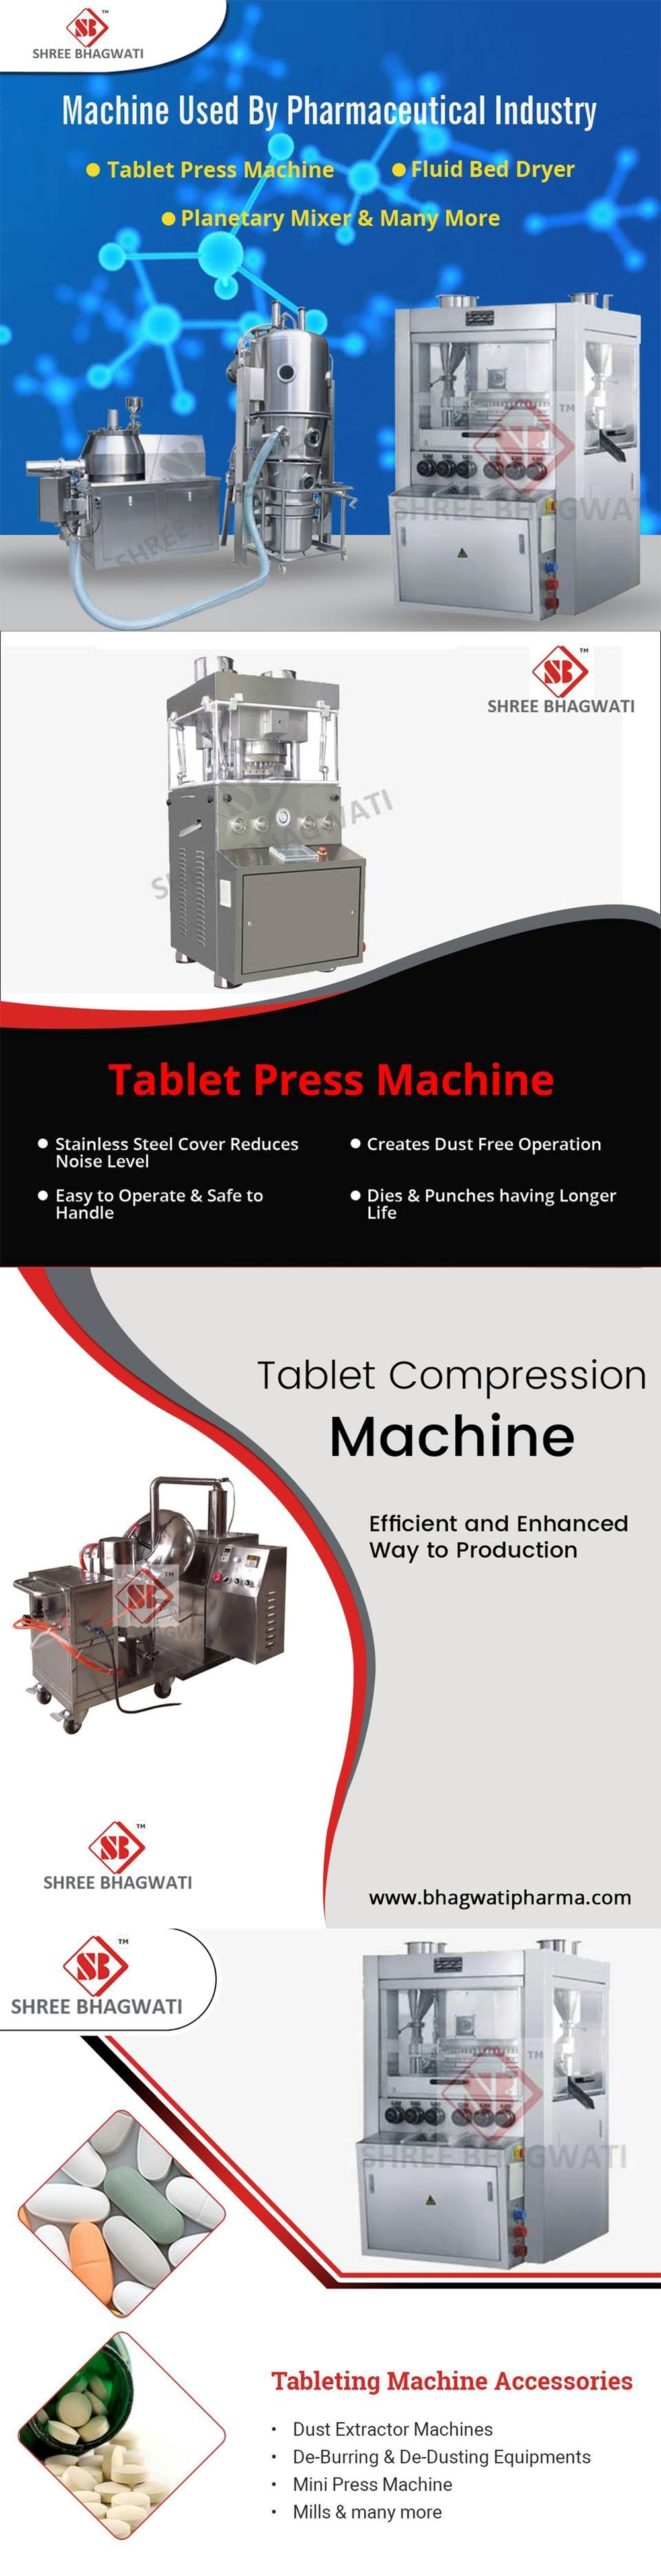 All About Tablet Compression Machines